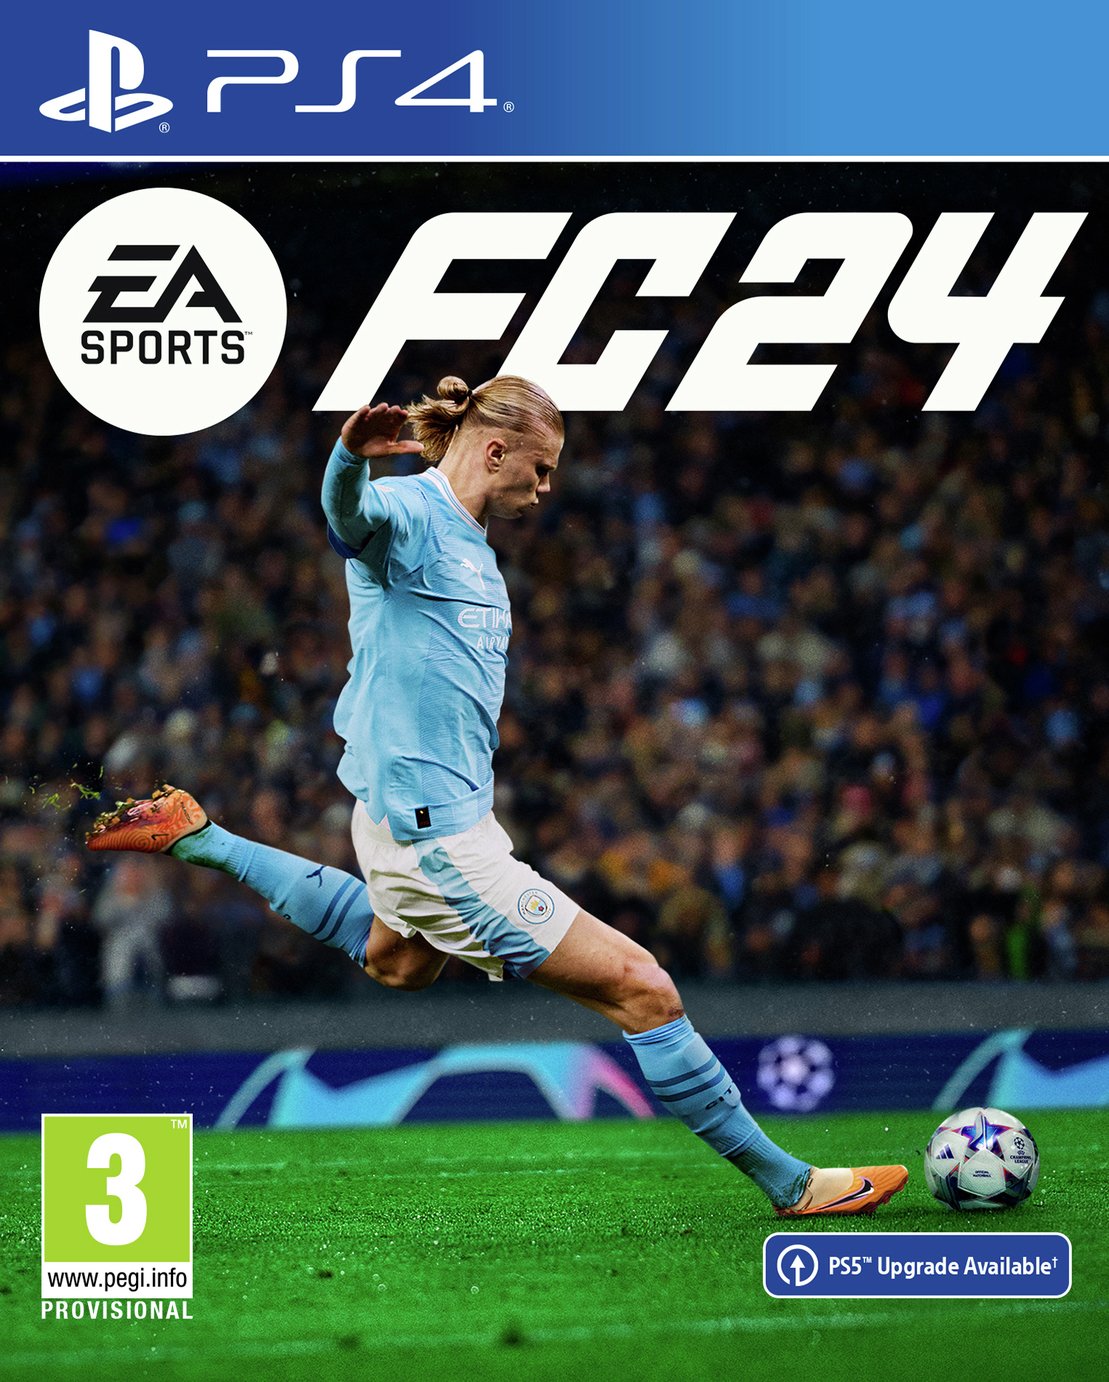 How to Download EA Sports FC Mobile 24 Beta iOS (100% Working